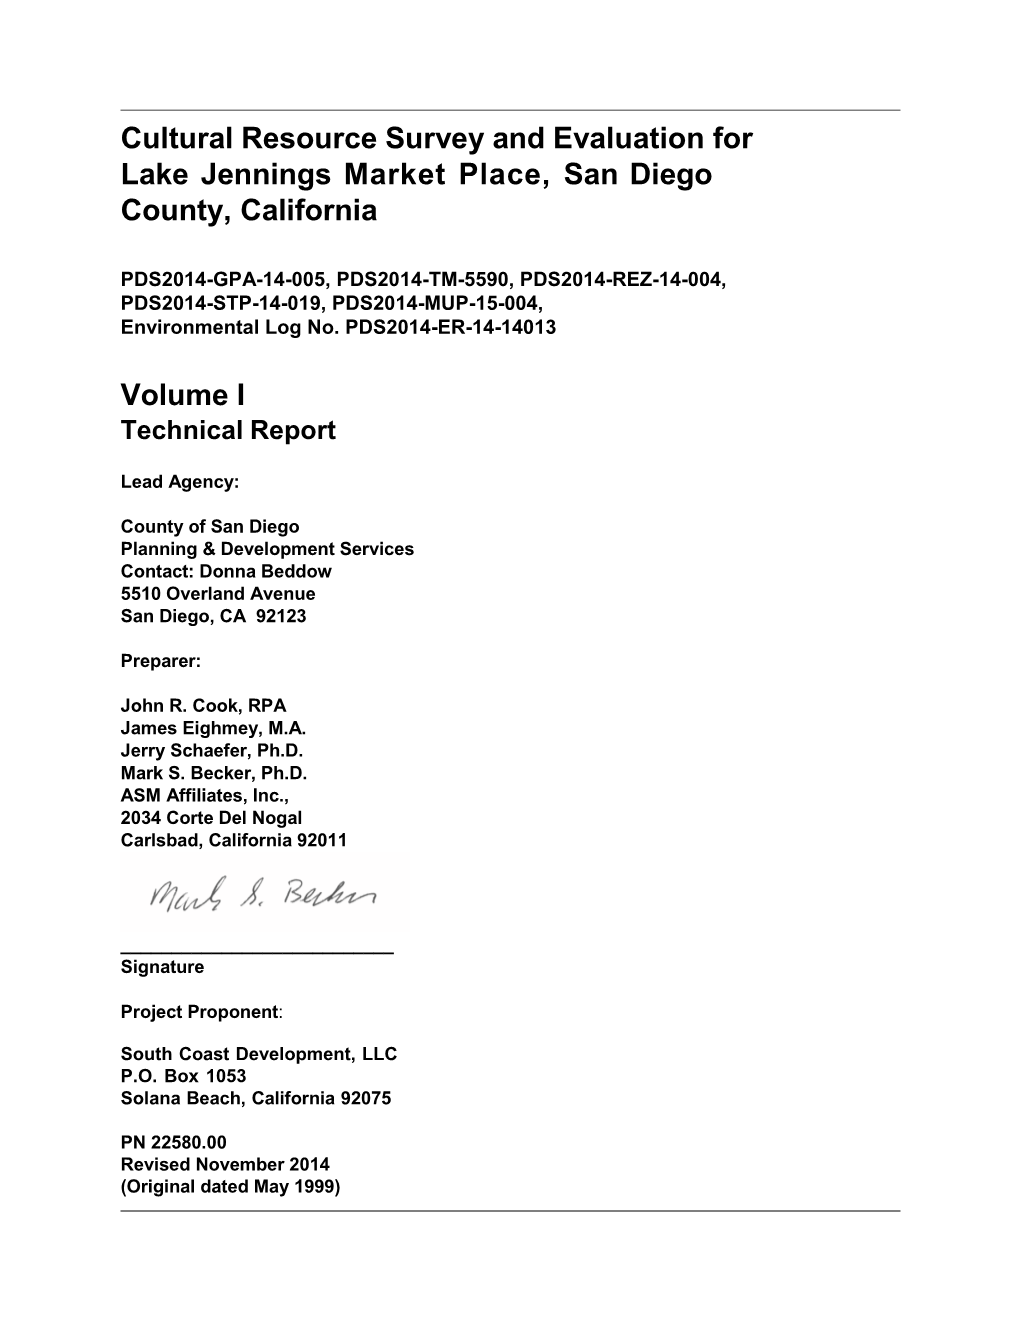 Cultural Resource Survey and Evaluation for Lake Jennings Market Place, San Diego County, California